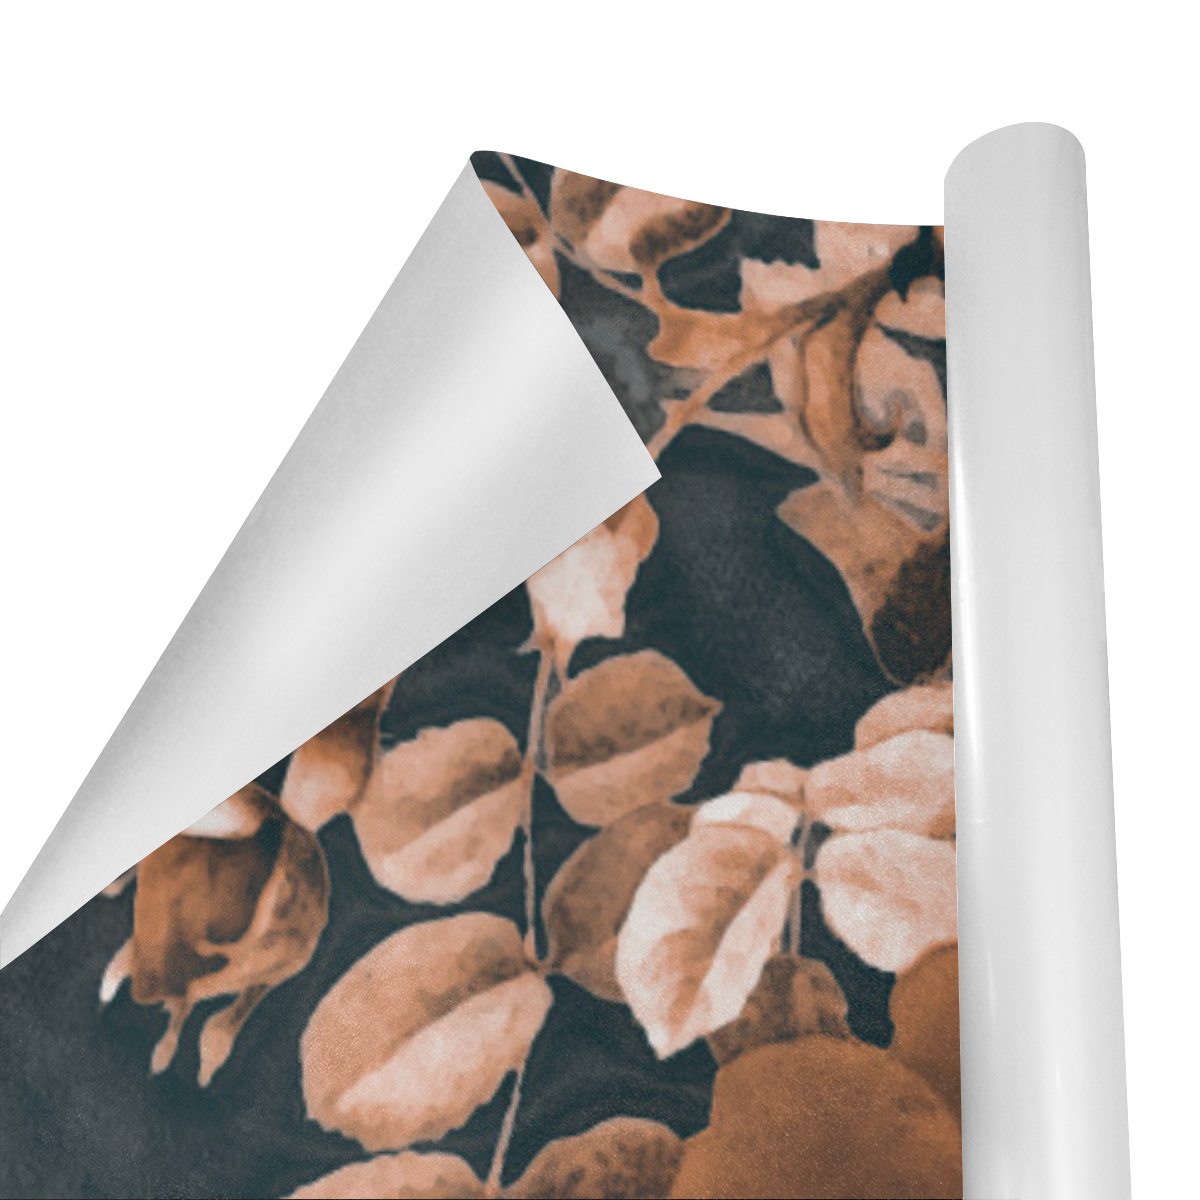 flowers #flowers #pattern #flora Gift Wrapping Paper 58"x 23" (5 Rolls)